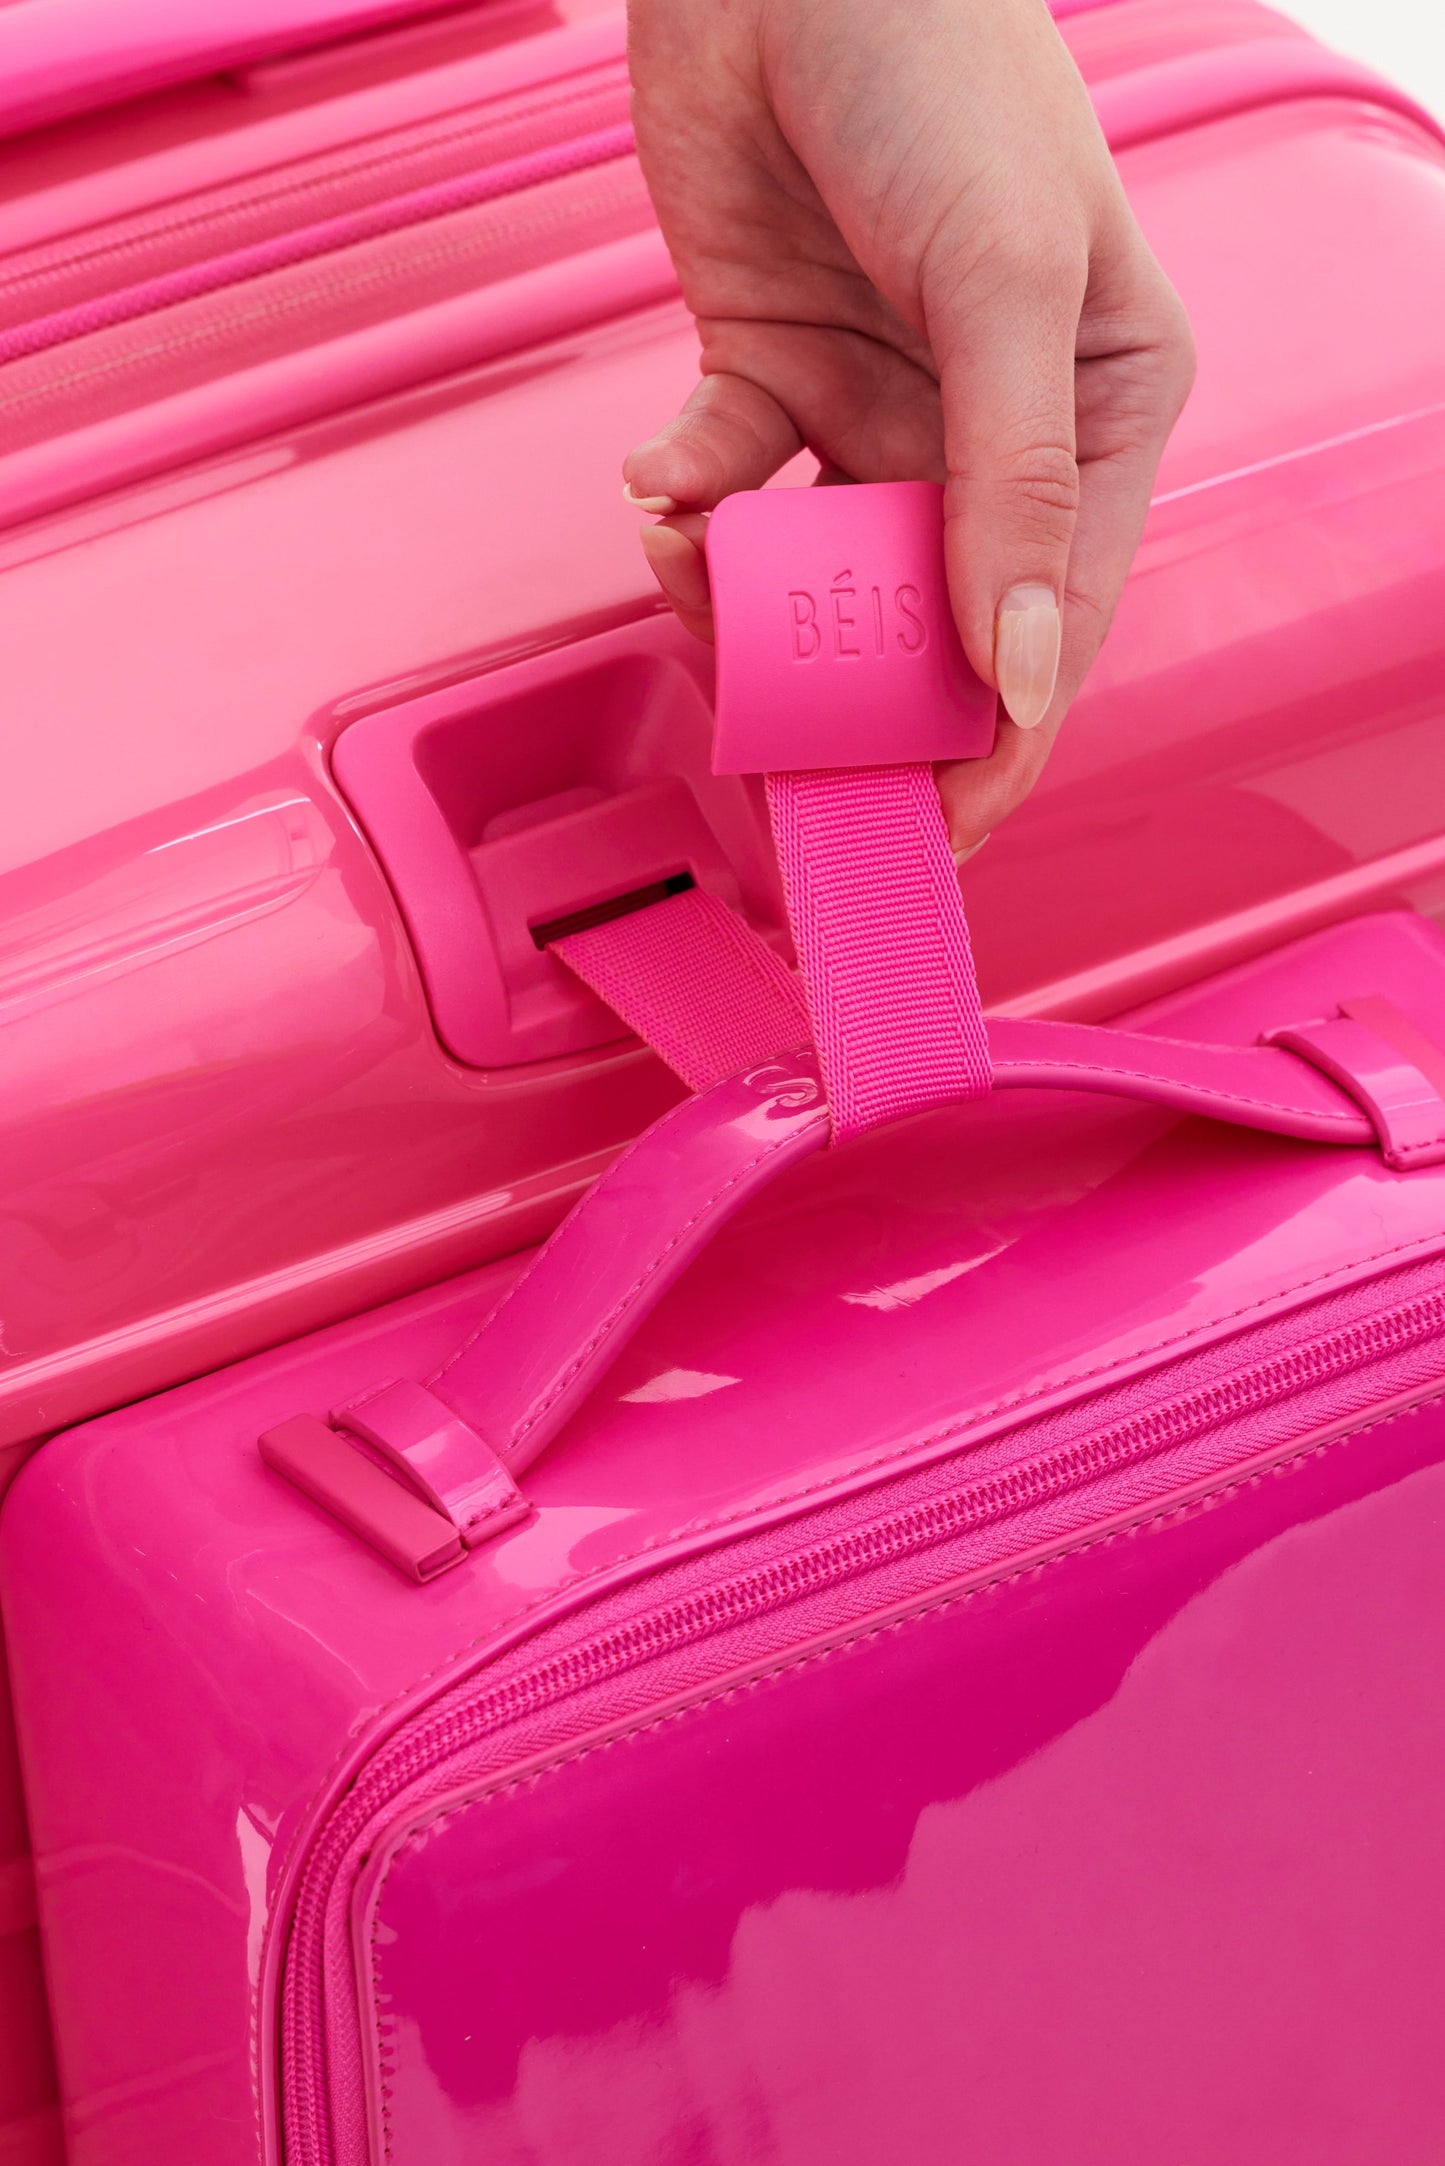 The 26" Check-in Roller in Barbie™ Pink